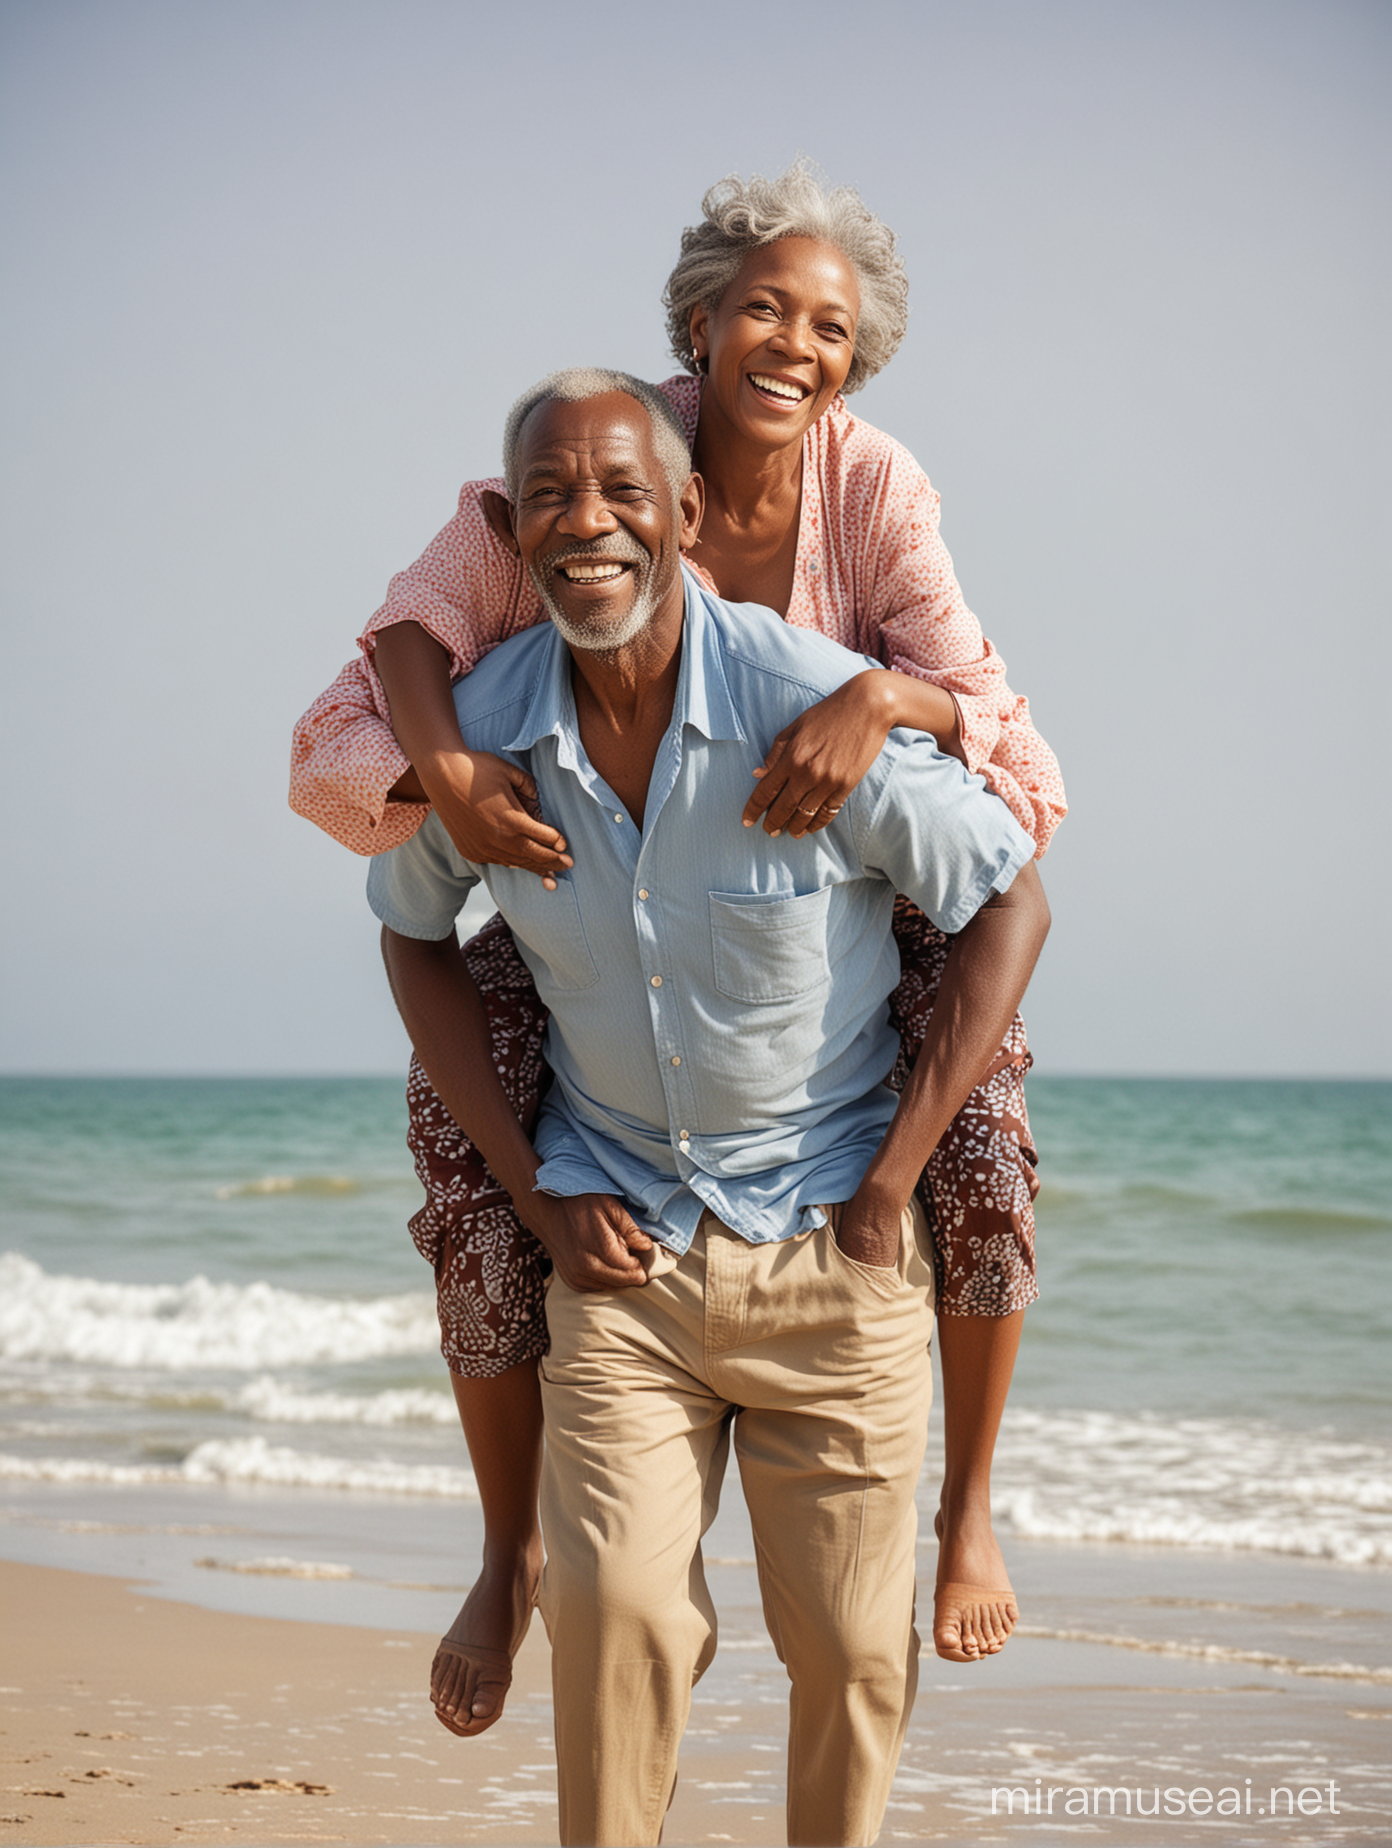 A playful portrait of an elderly African couple taking piggyback rides at the beach together.